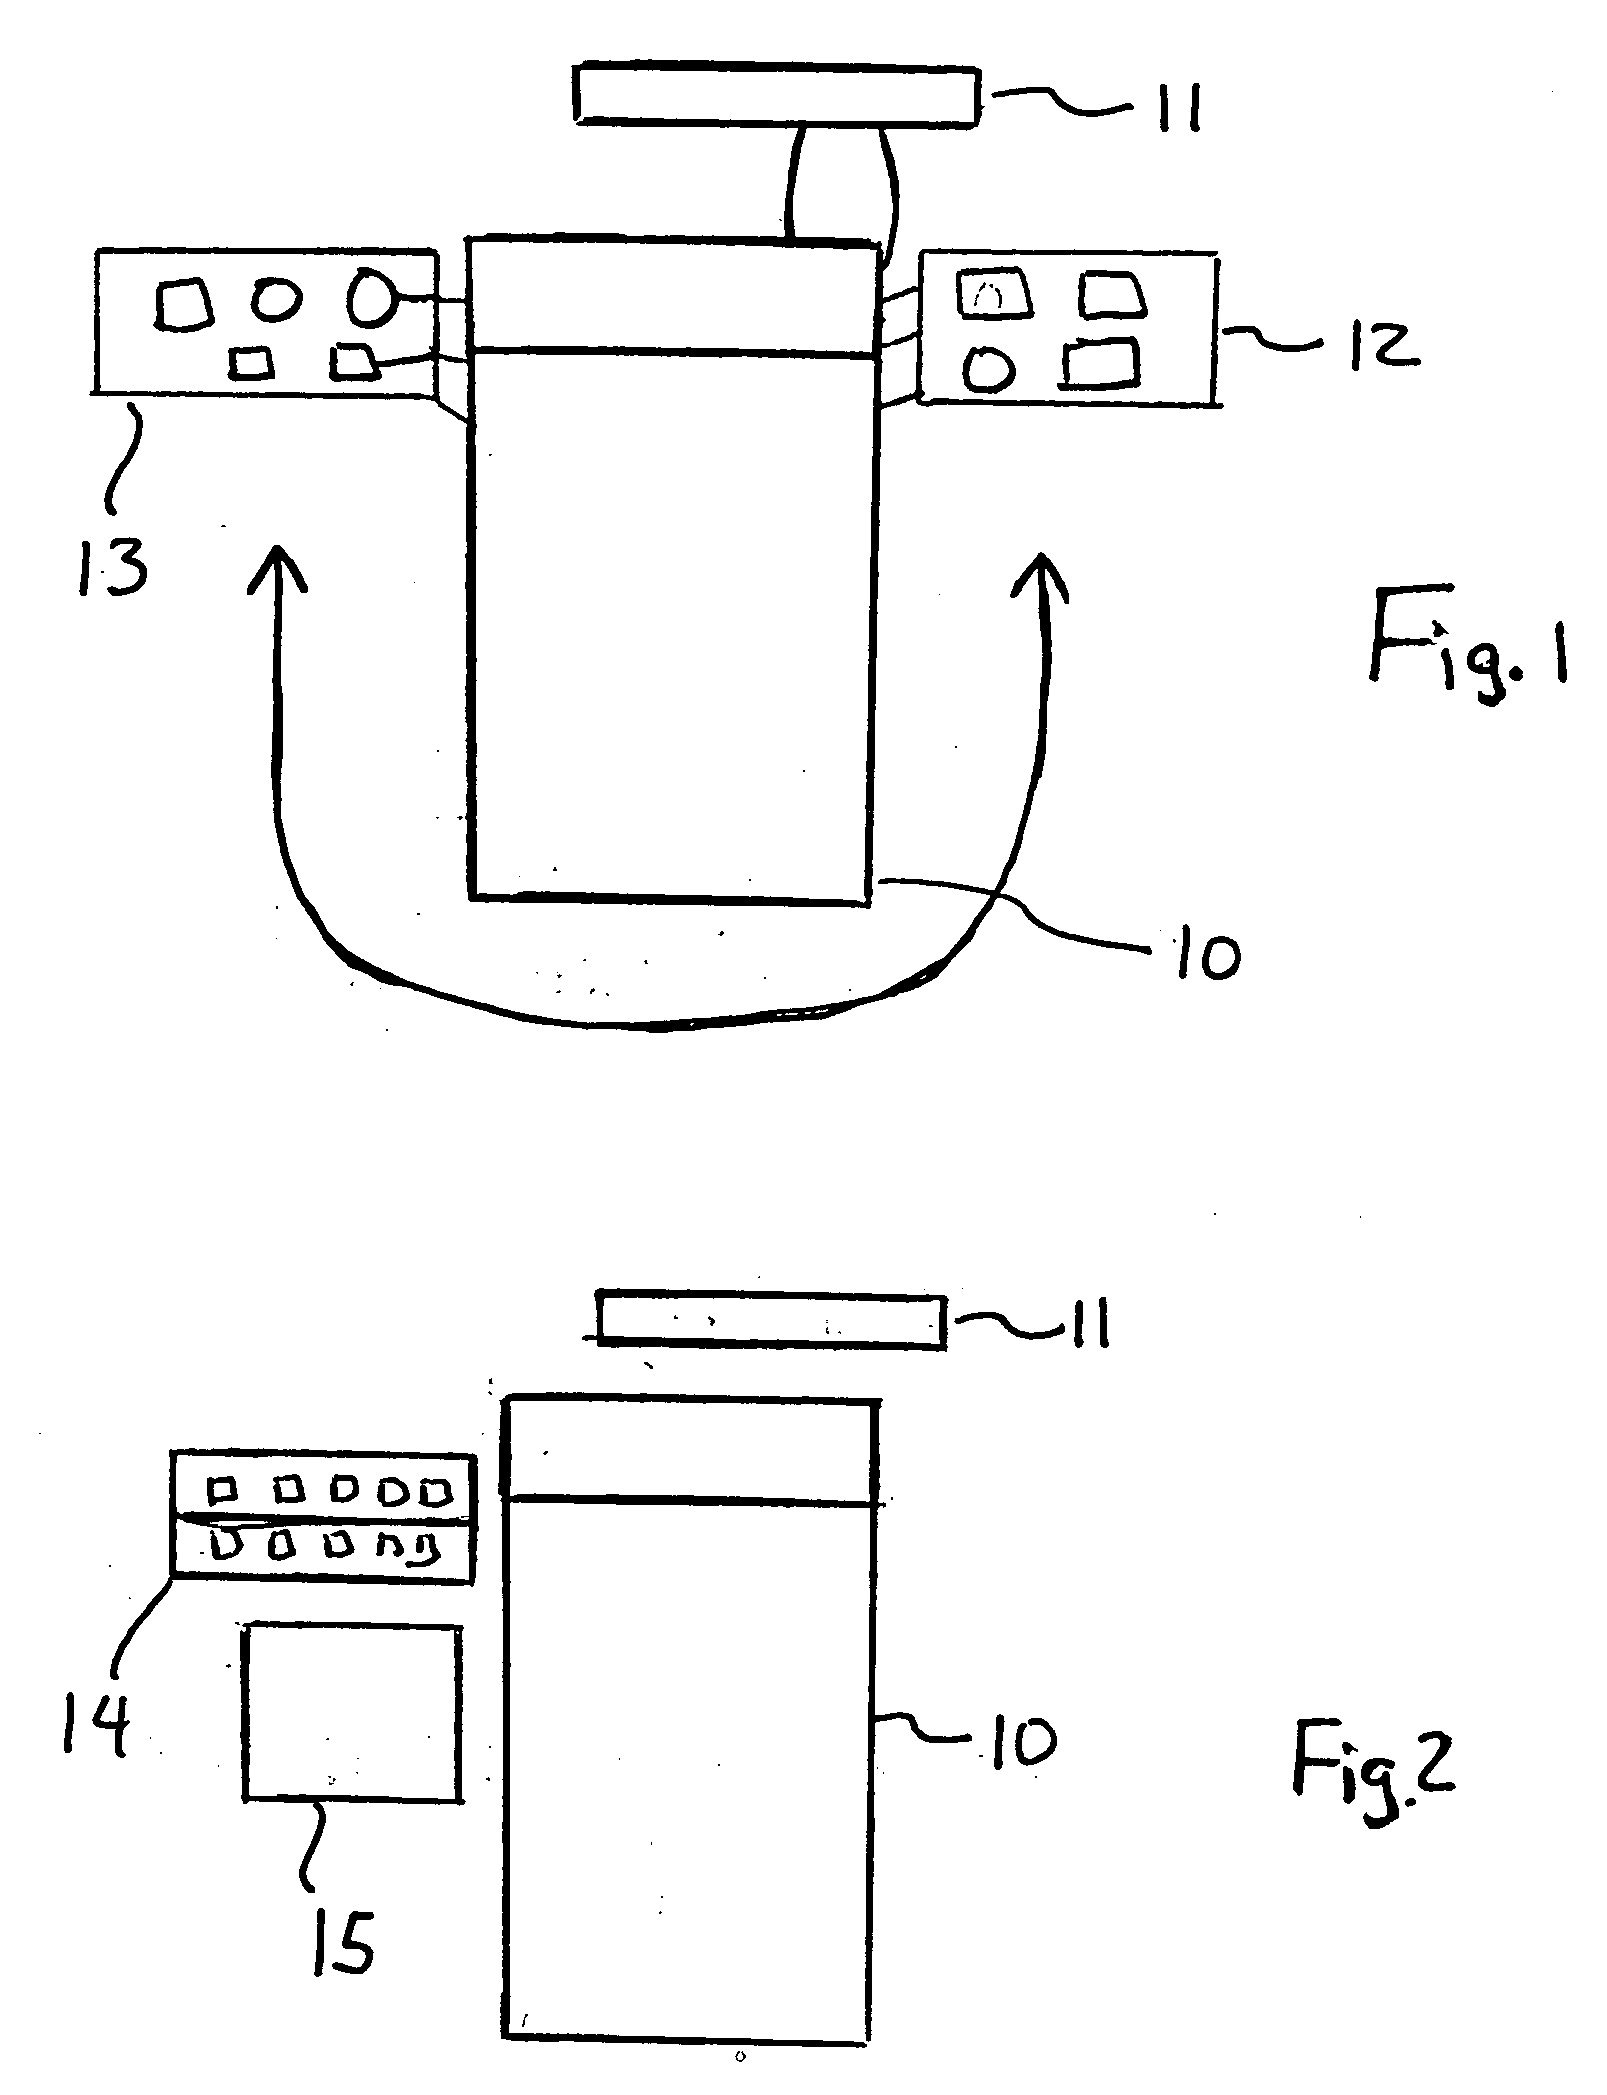 Method and workstation for single patient medical care